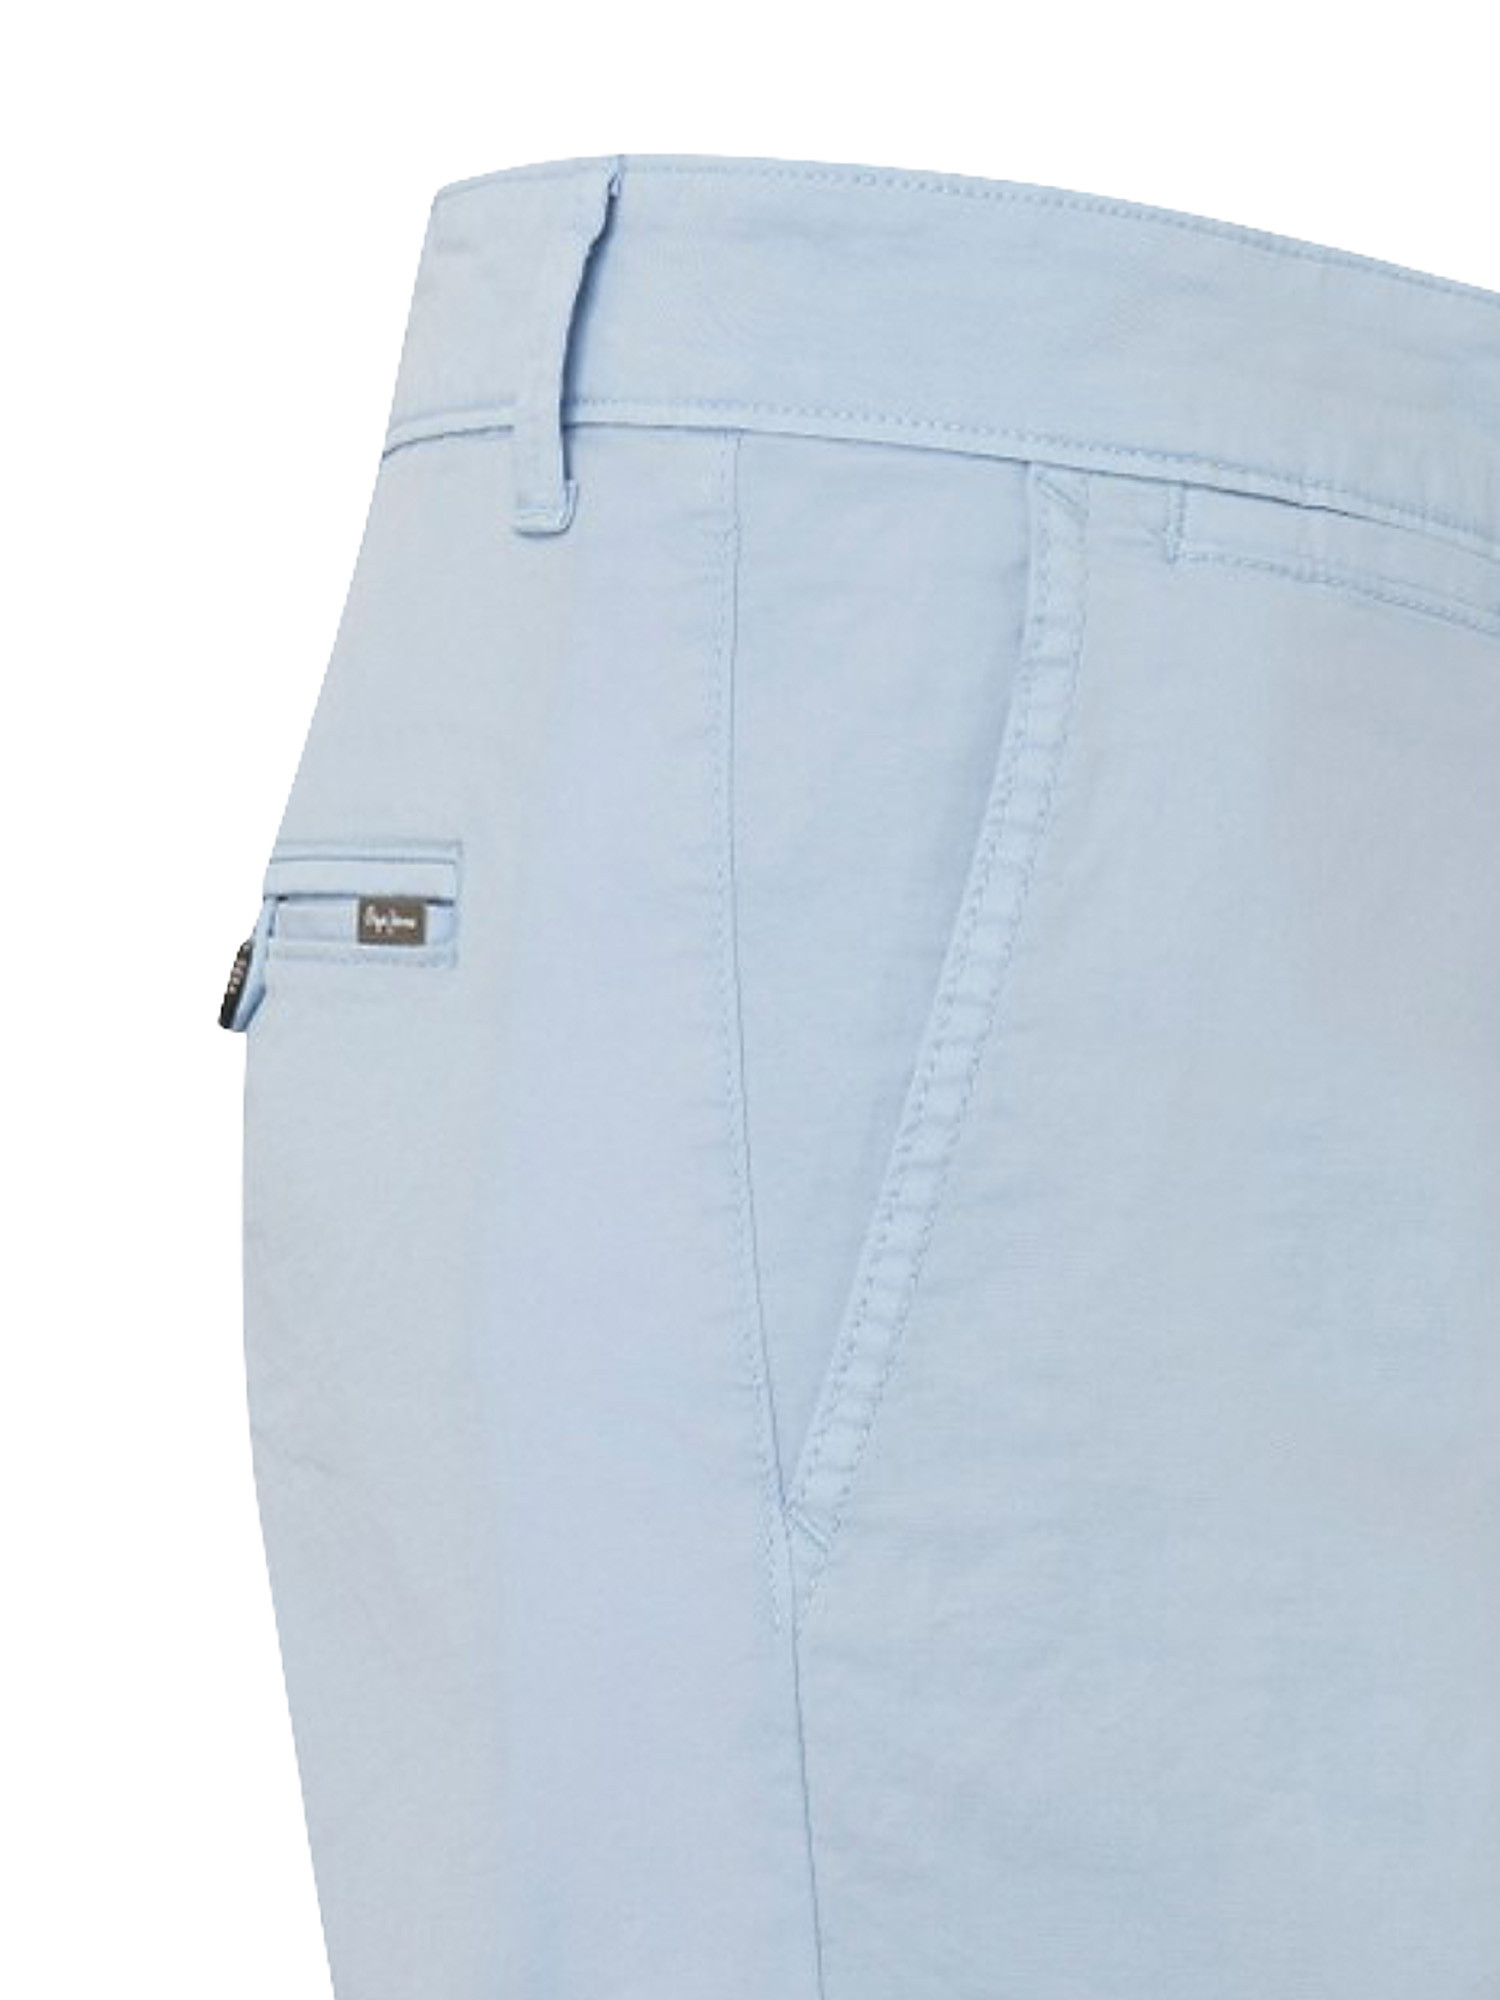 Mc queen  chino-style bermuda shorts, Light Blue, large image number 2